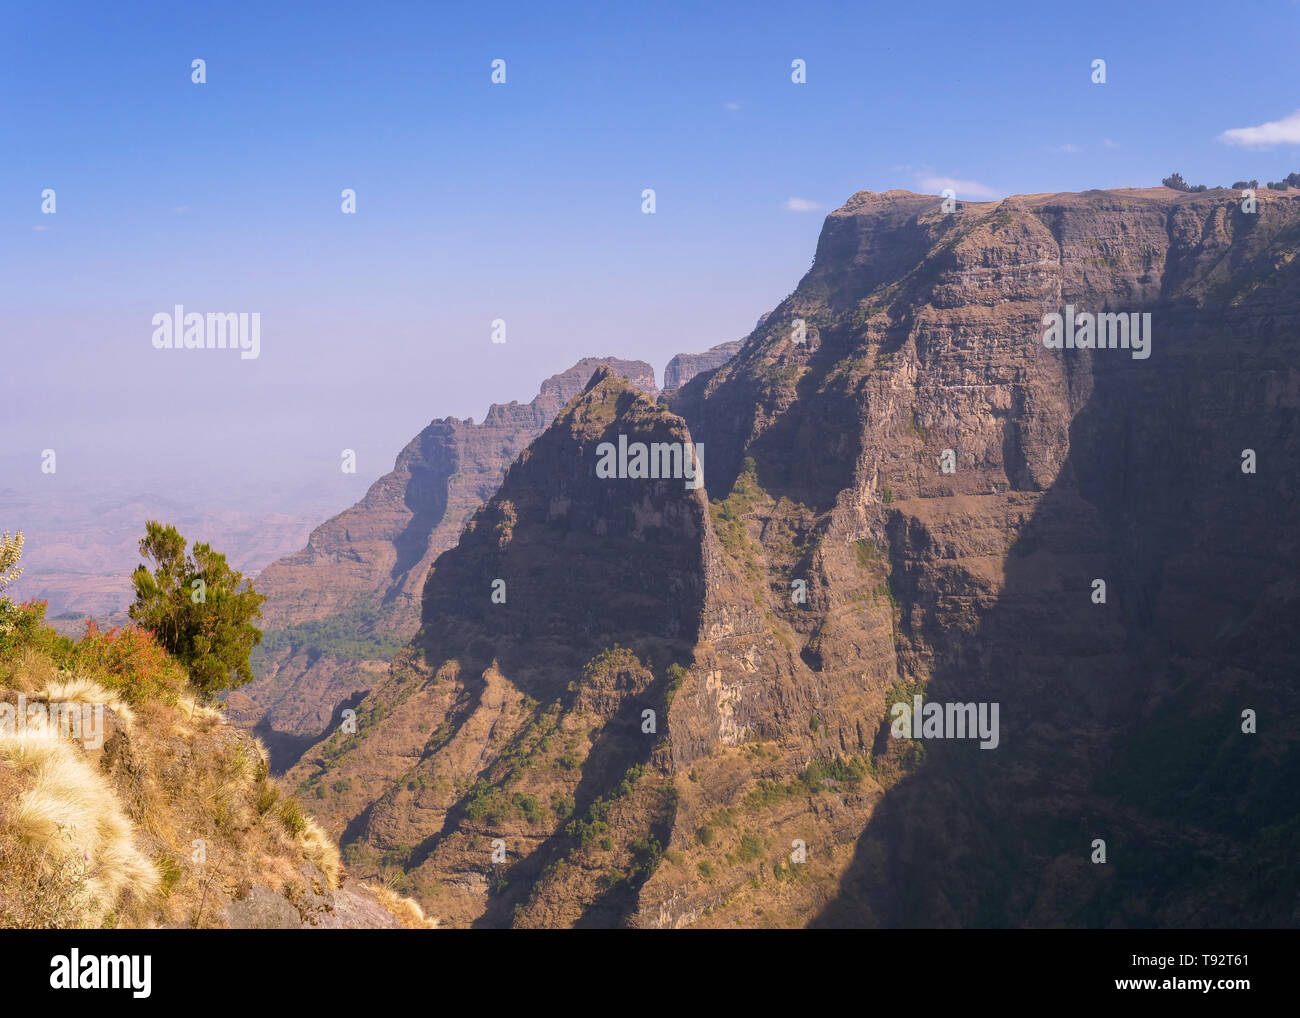 Panorama of the Simien Mountains National Park in Ethiopia Stock Photo